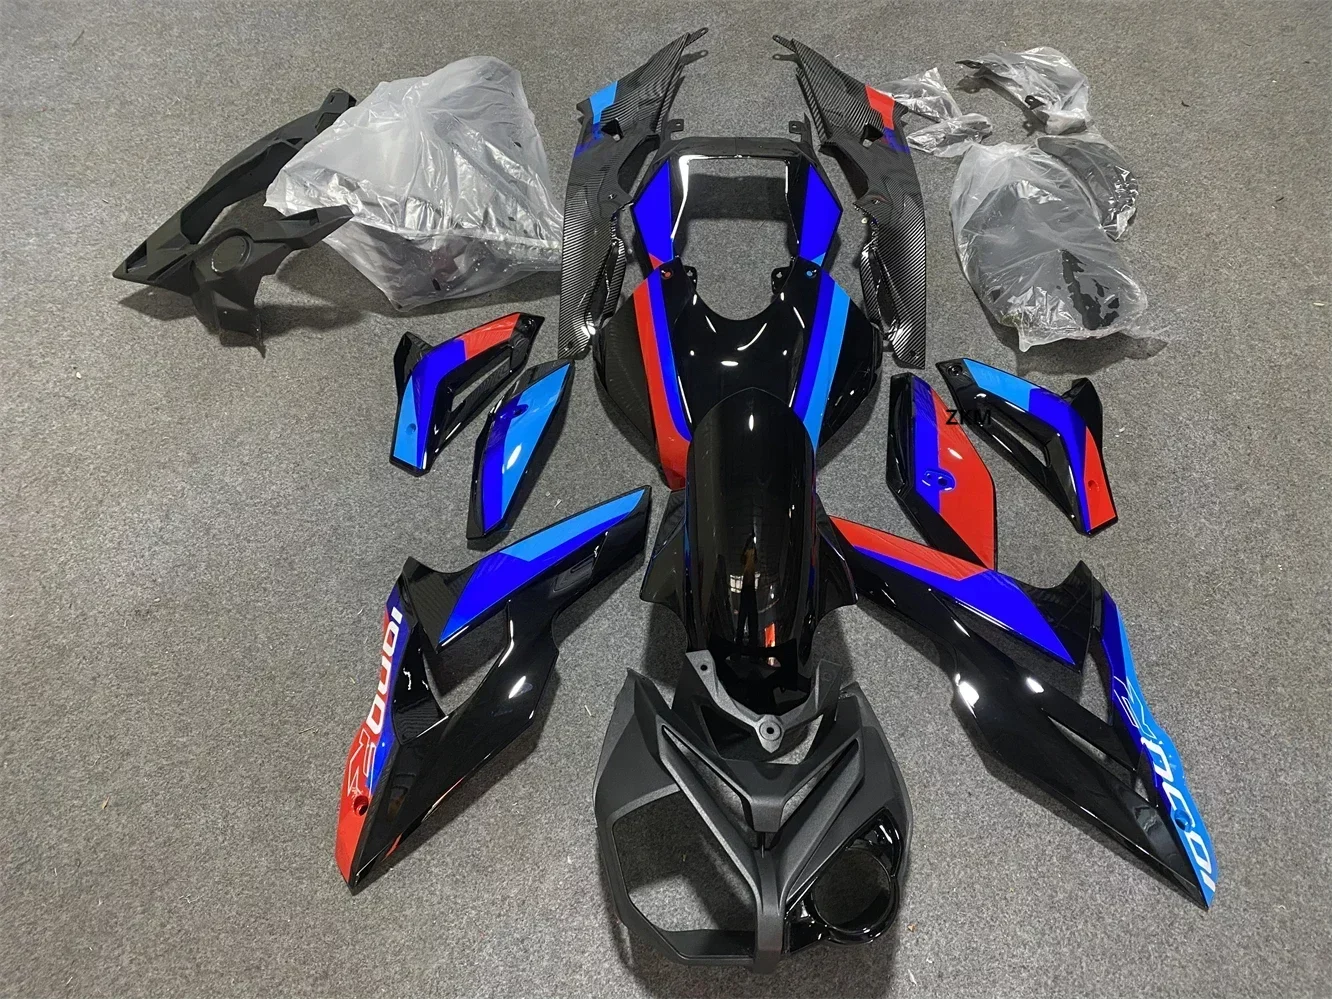 

Motorcycle Bodywork Cowling Accessories Full Fairing Kits for S1000R 2015-2016-2017 Injection Molding S1000 R 15-16-17